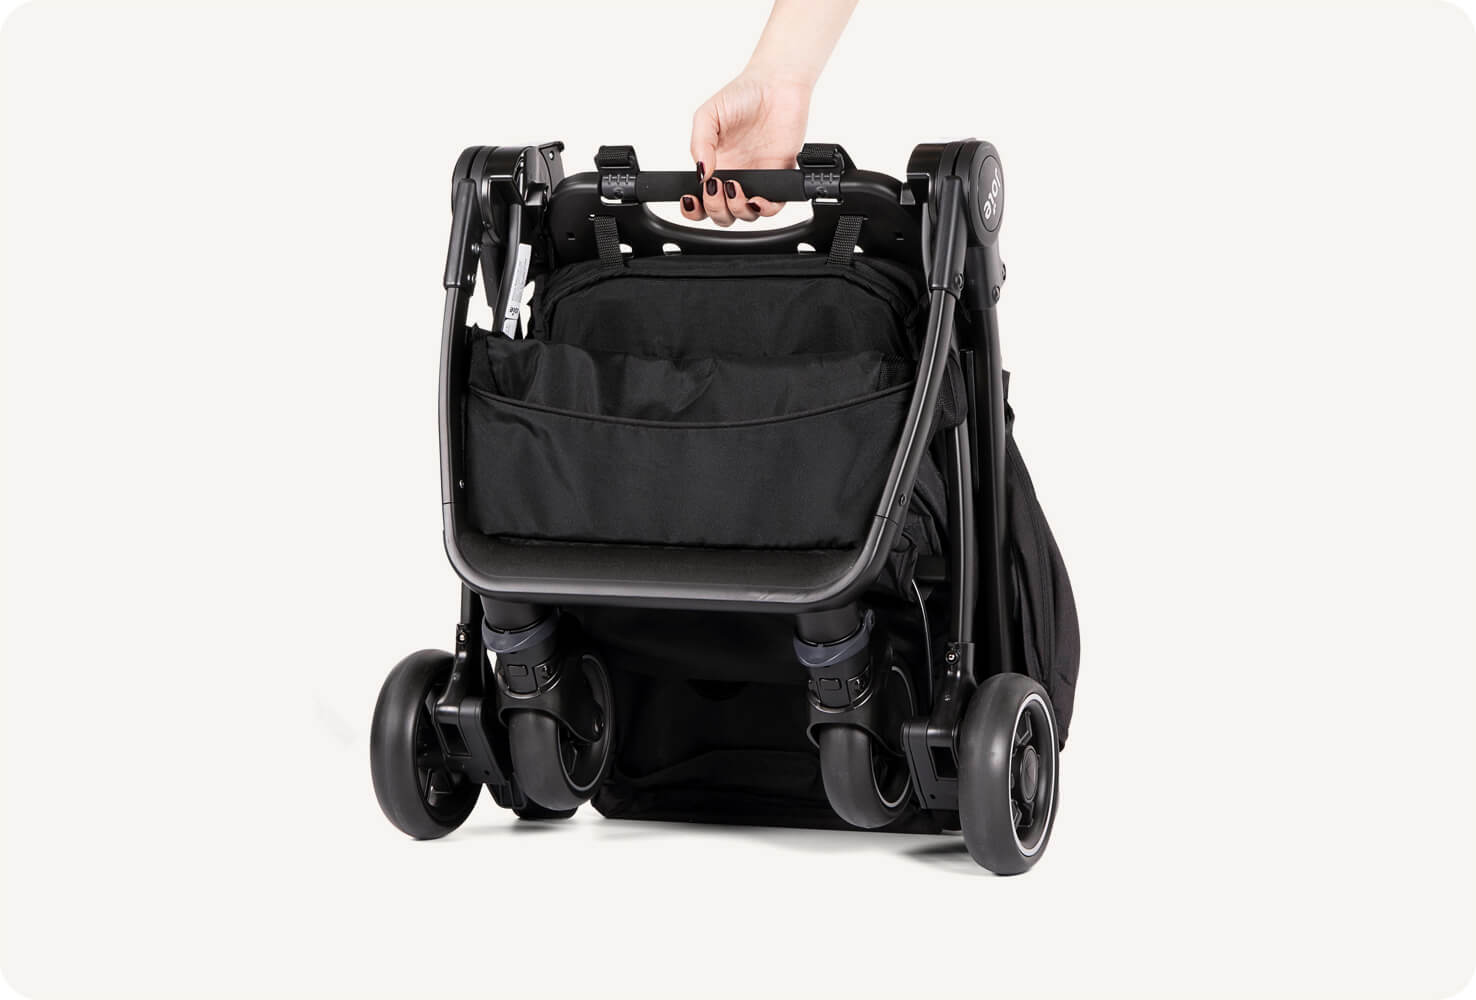  joie pact travel system is lightweight 